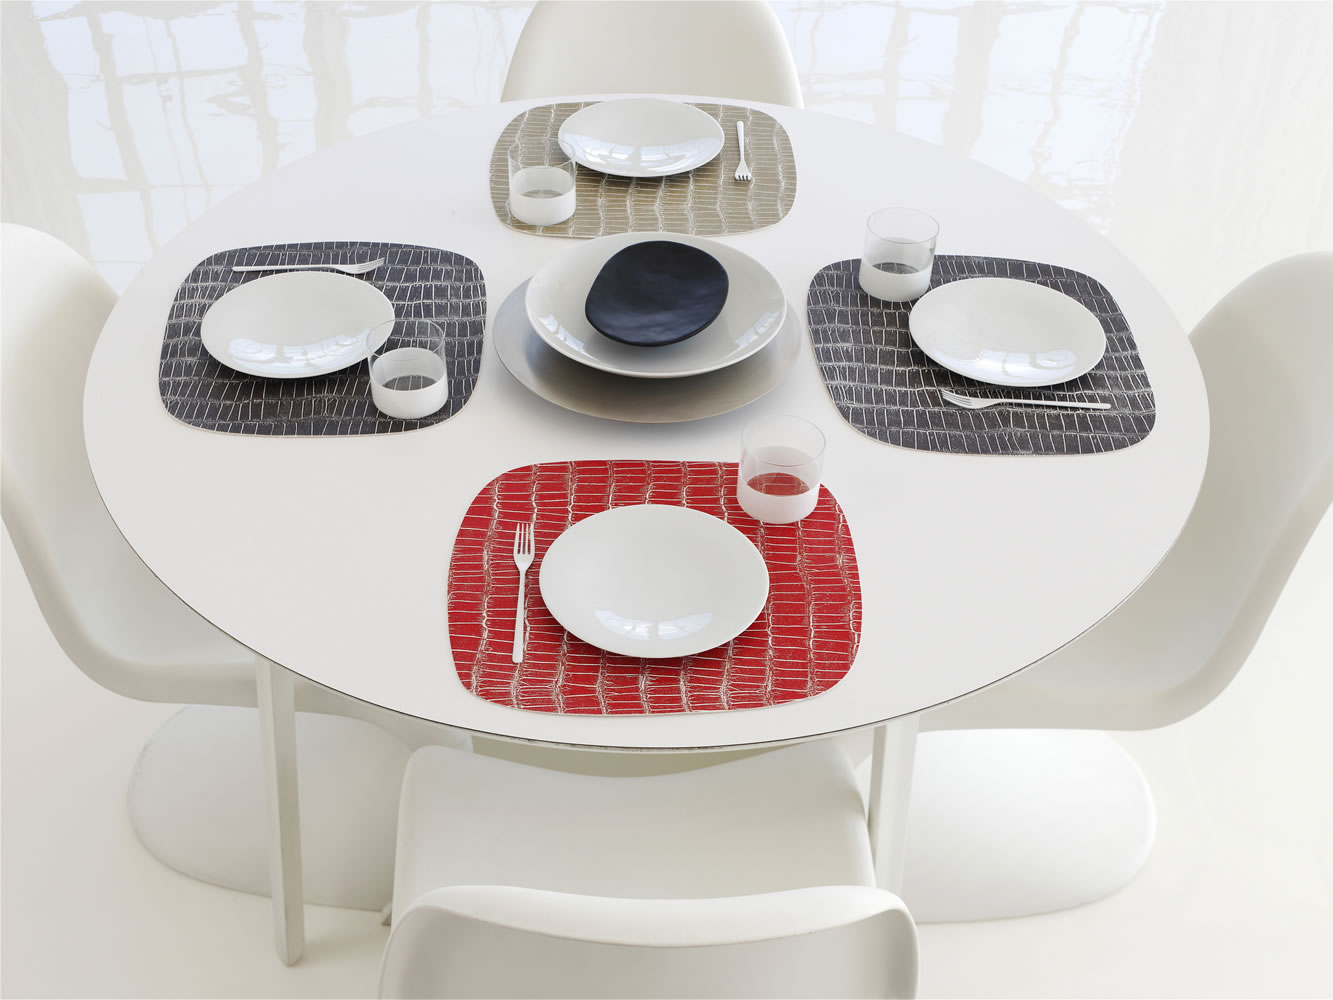 Mod croc retro-shape place mats in black, red and tan.